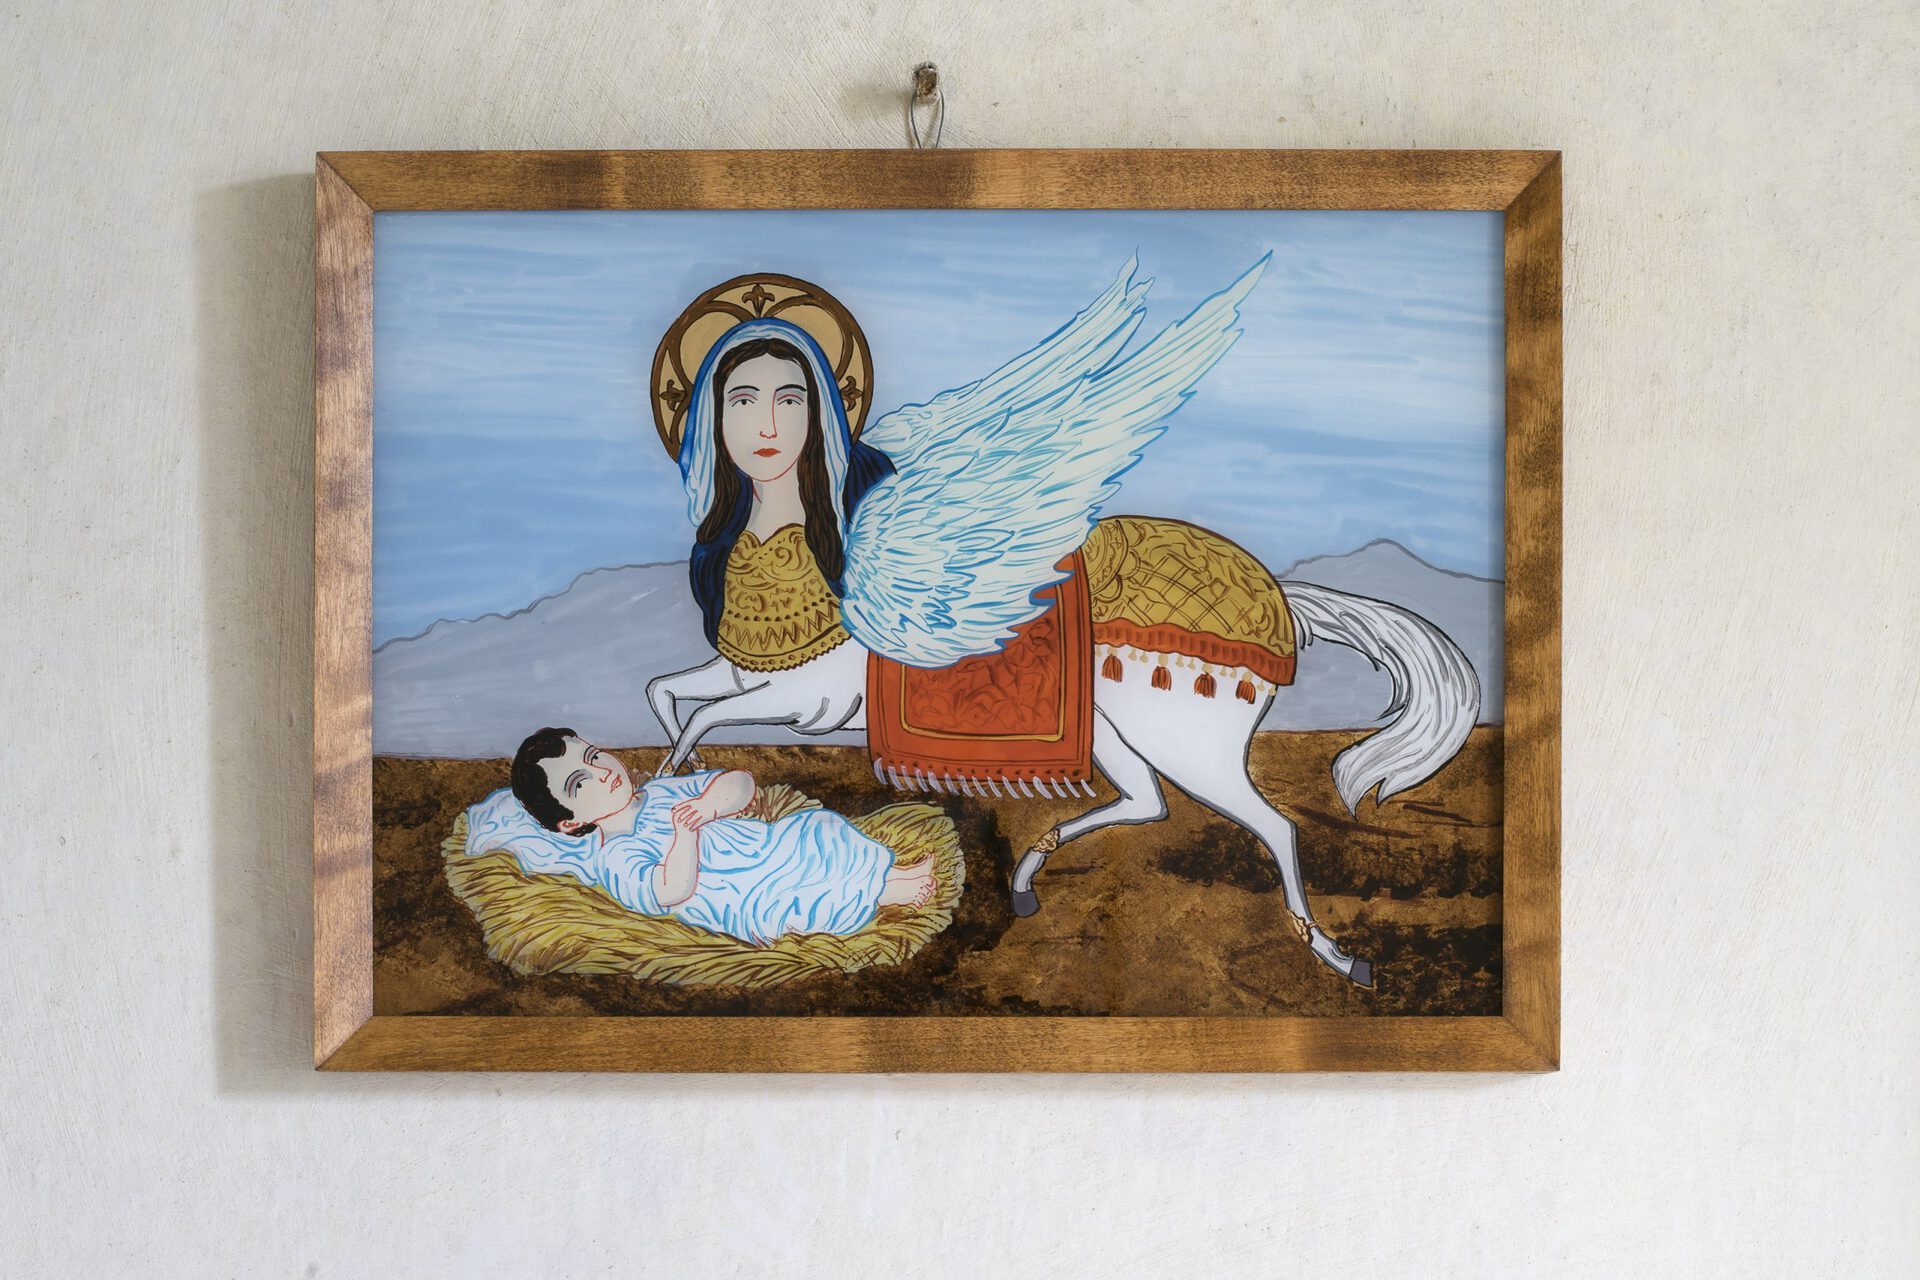 Slavs and Tatars, Communion (Virgin Buraq), 2021 reverse painting on glass with acrylic and synthetic paint 32 × 44 cm courtesy of the artists and Raster Gallery, Warsaw